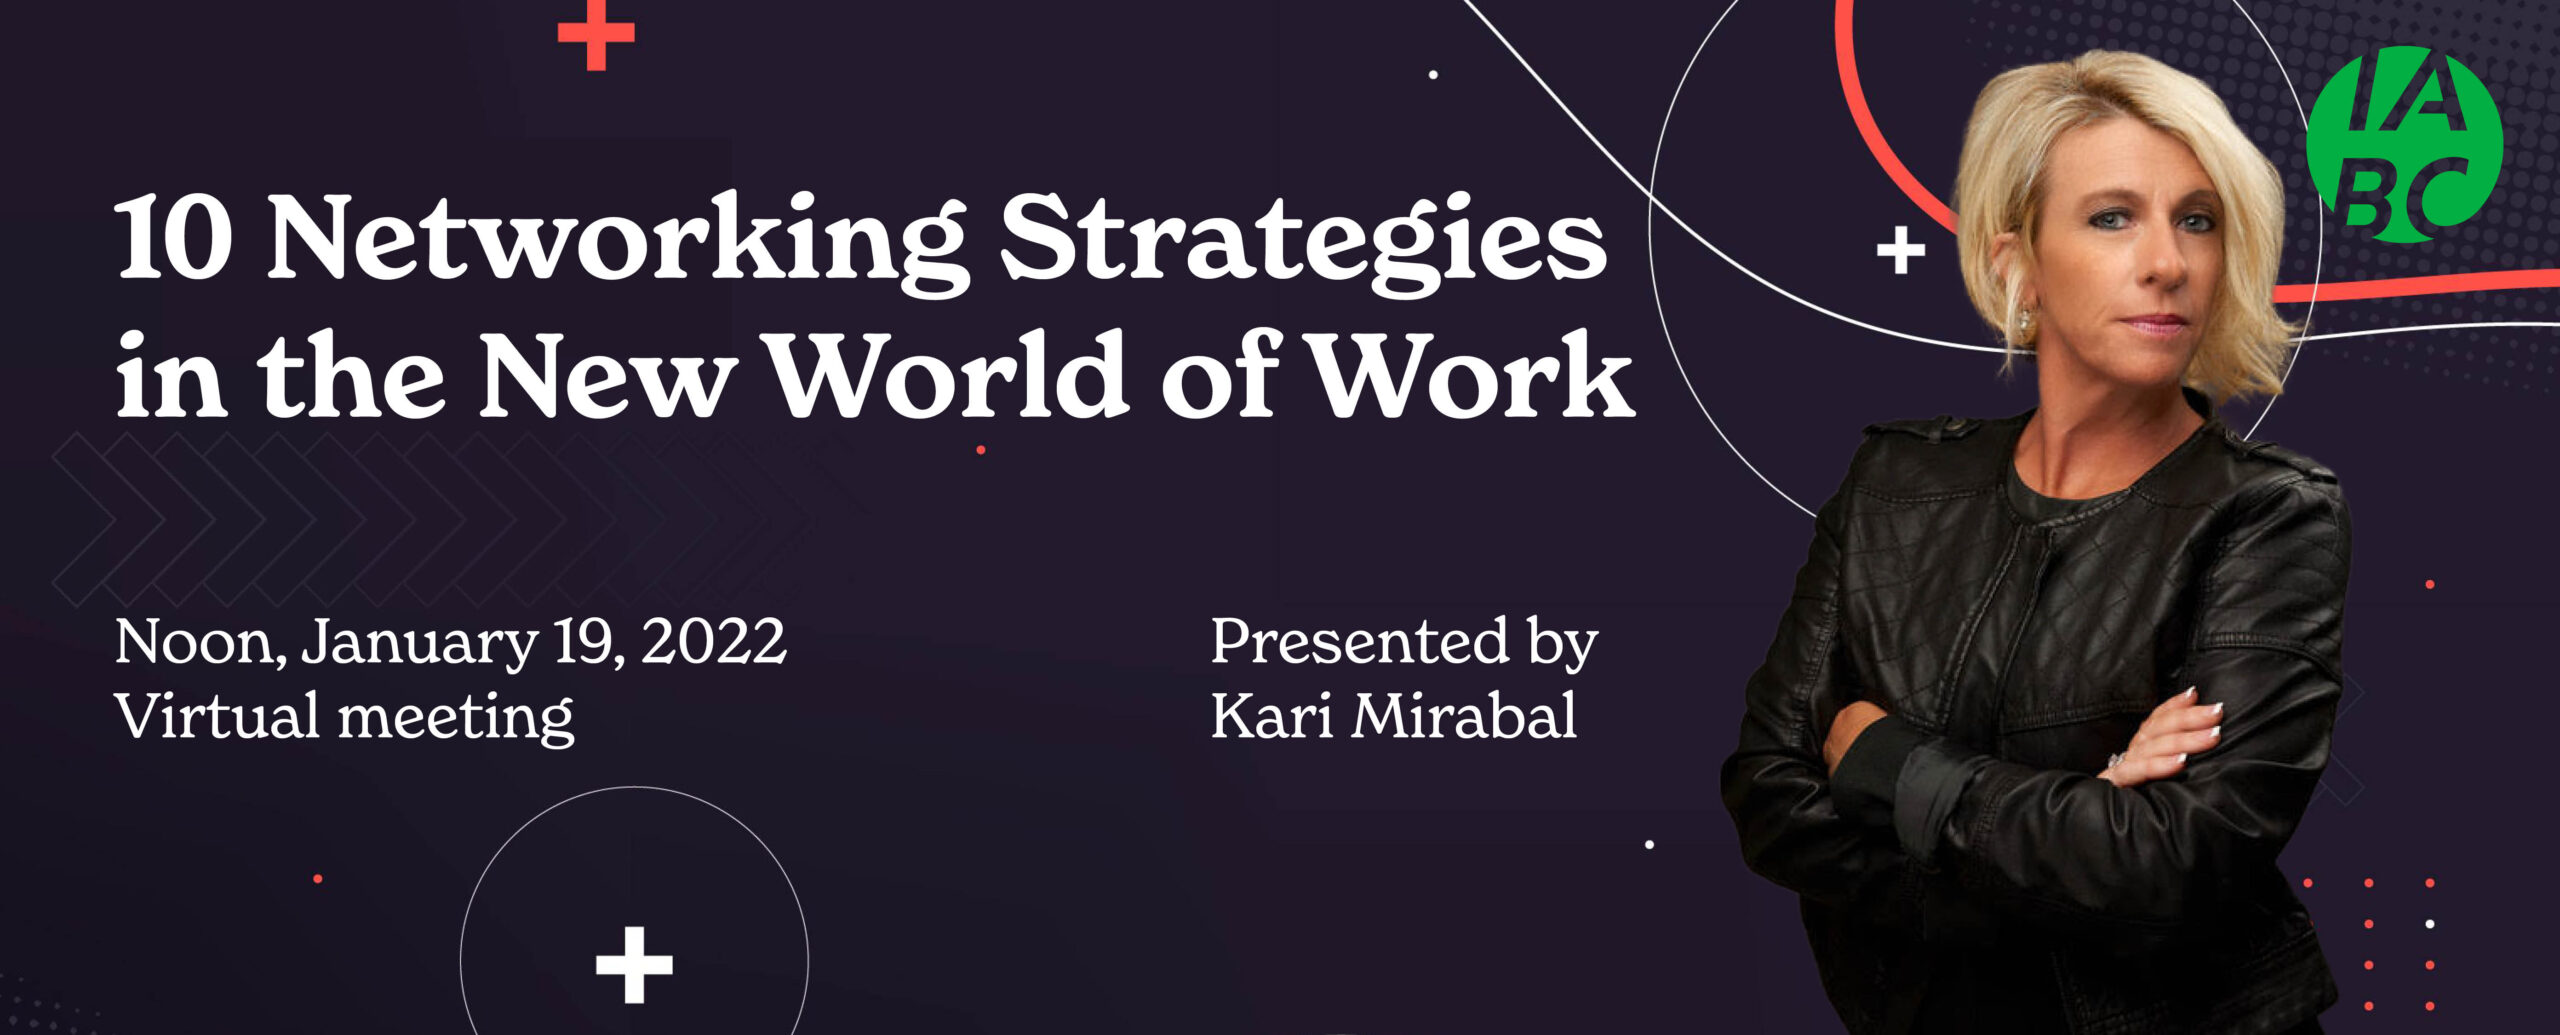 10 Networking Strategies in the New World of Work